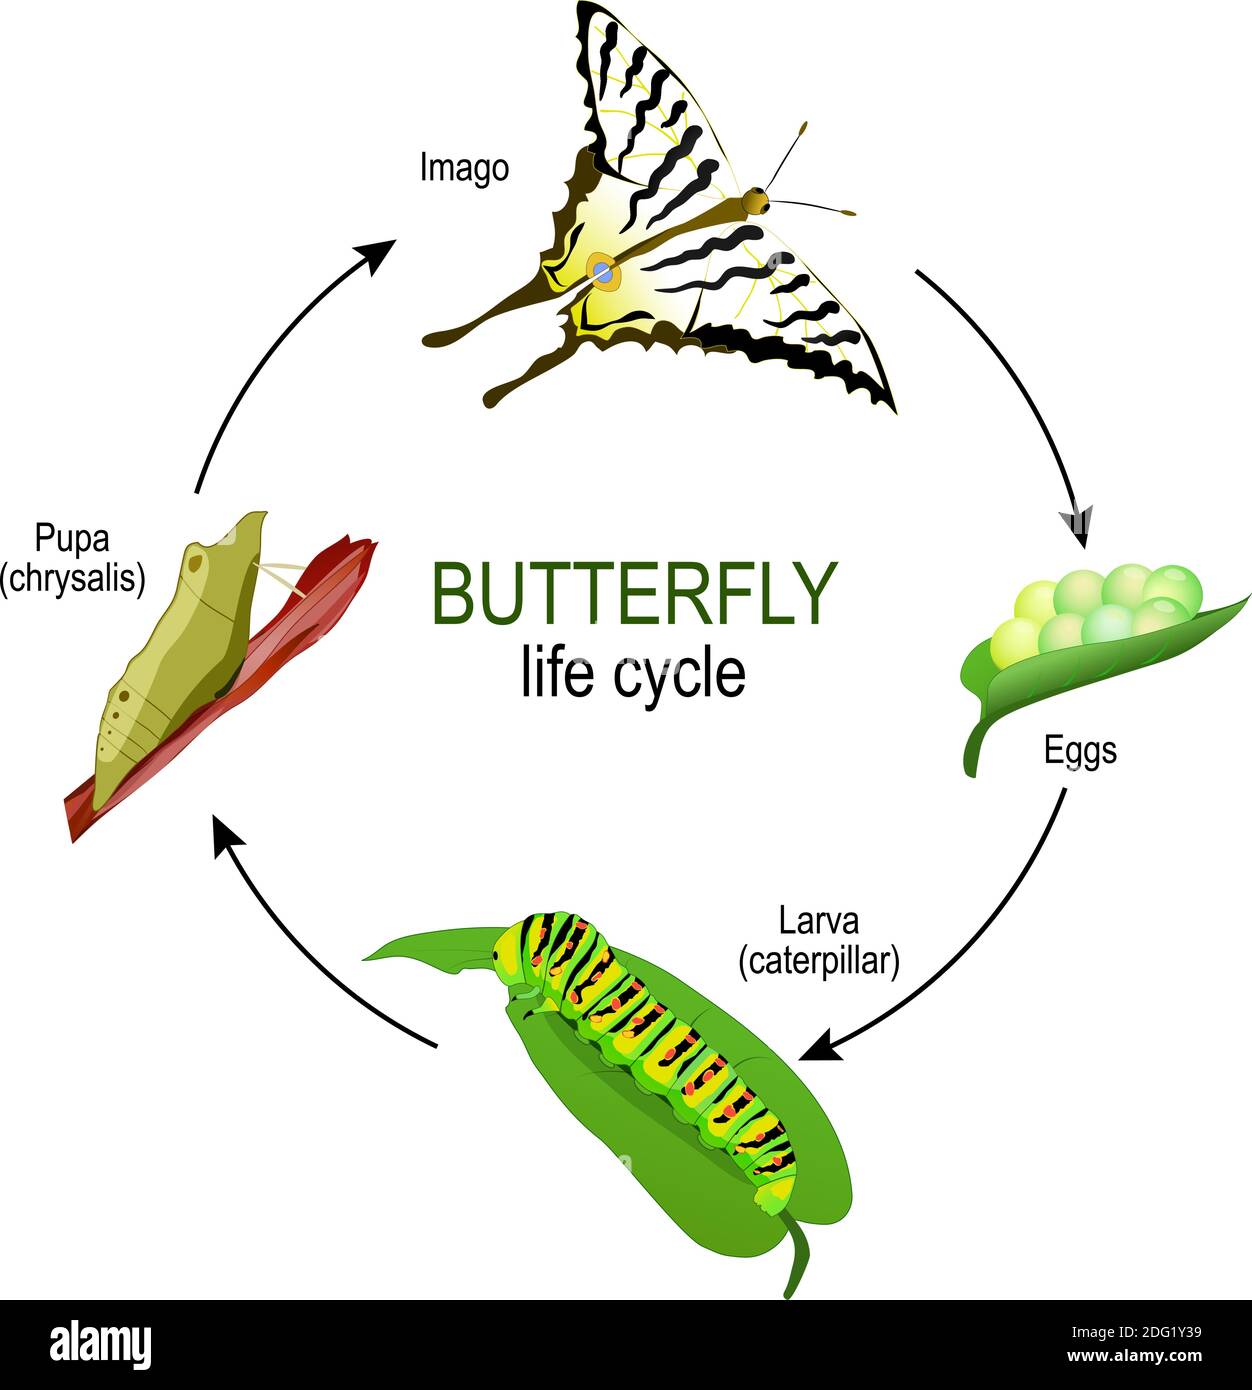 butterfly life cycle from eggs and Larva (caterpillar) to Pupa (chrysalis) and Imago. Vector diagram for educational, science, and biological use Stock Vector